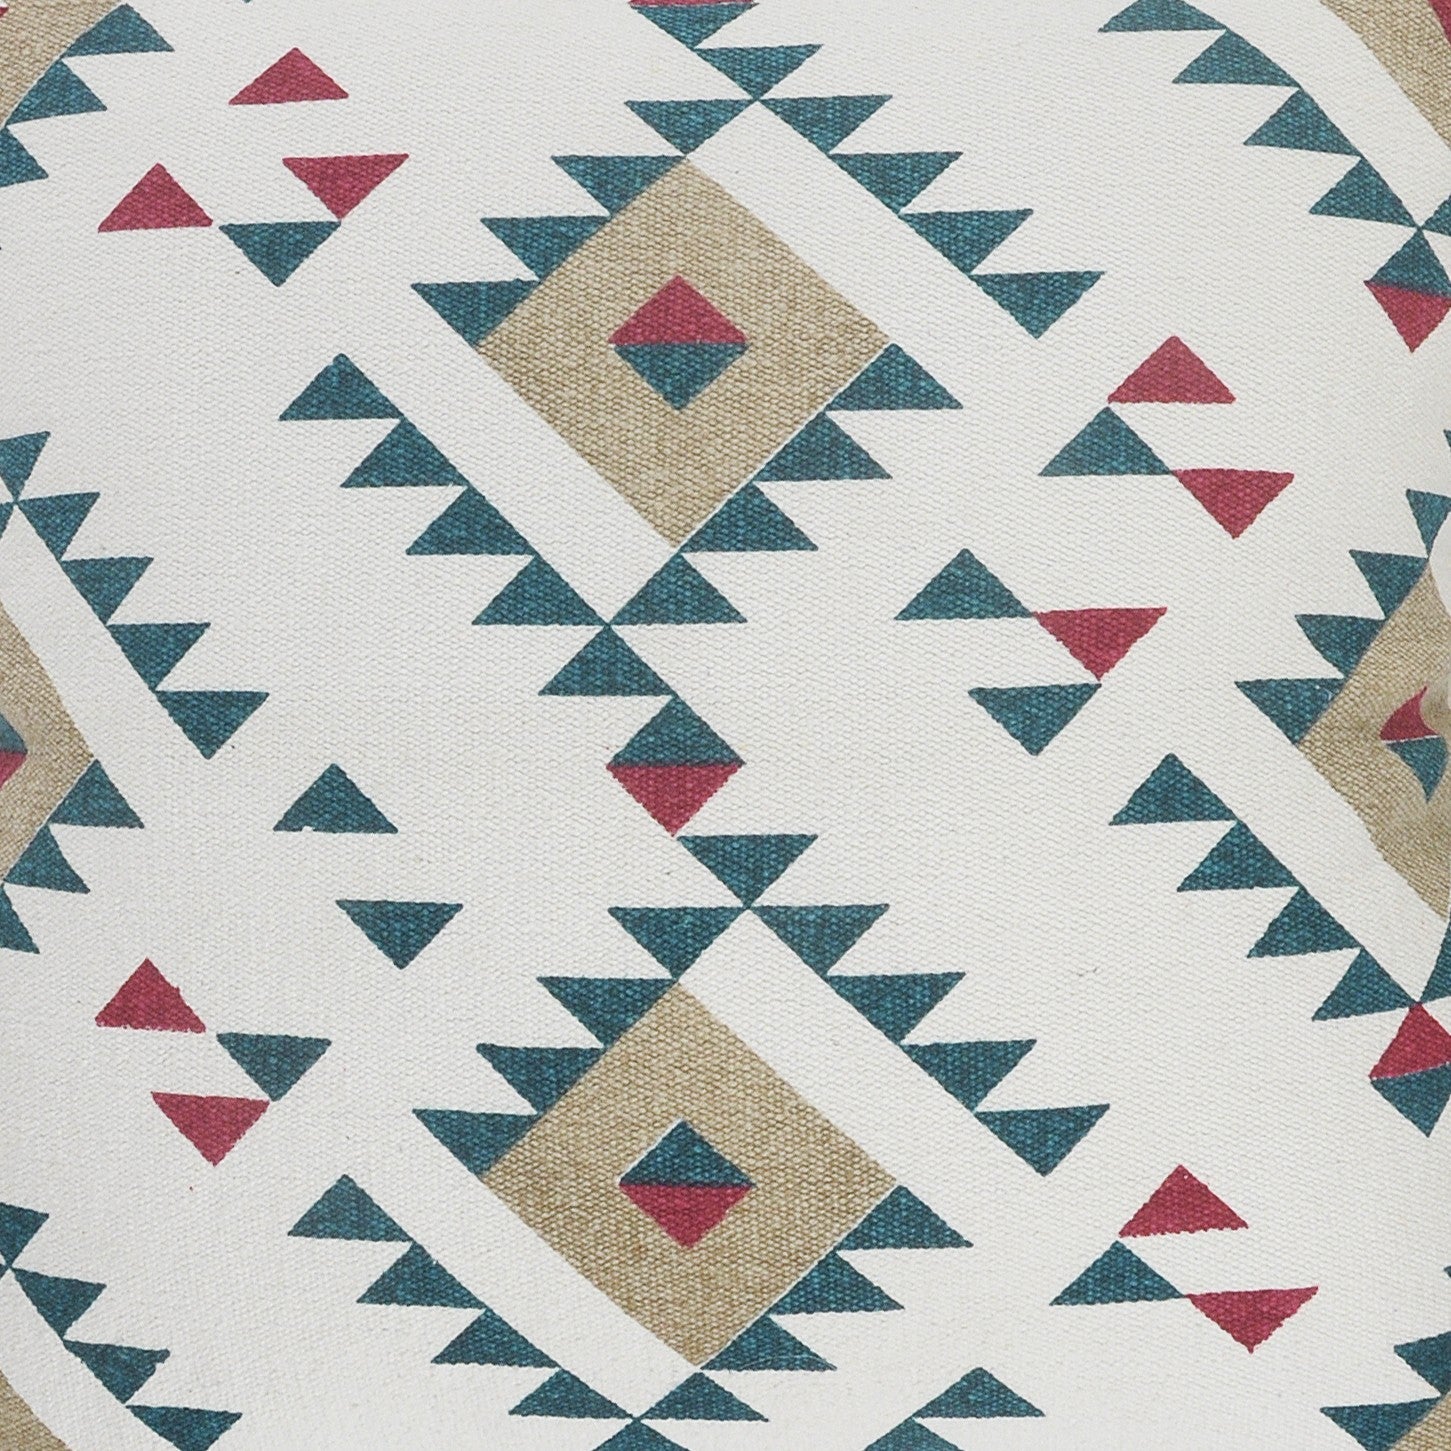 Eclectic Southwestern Geometric Lr07573 Multi Pillow - Rug & Home